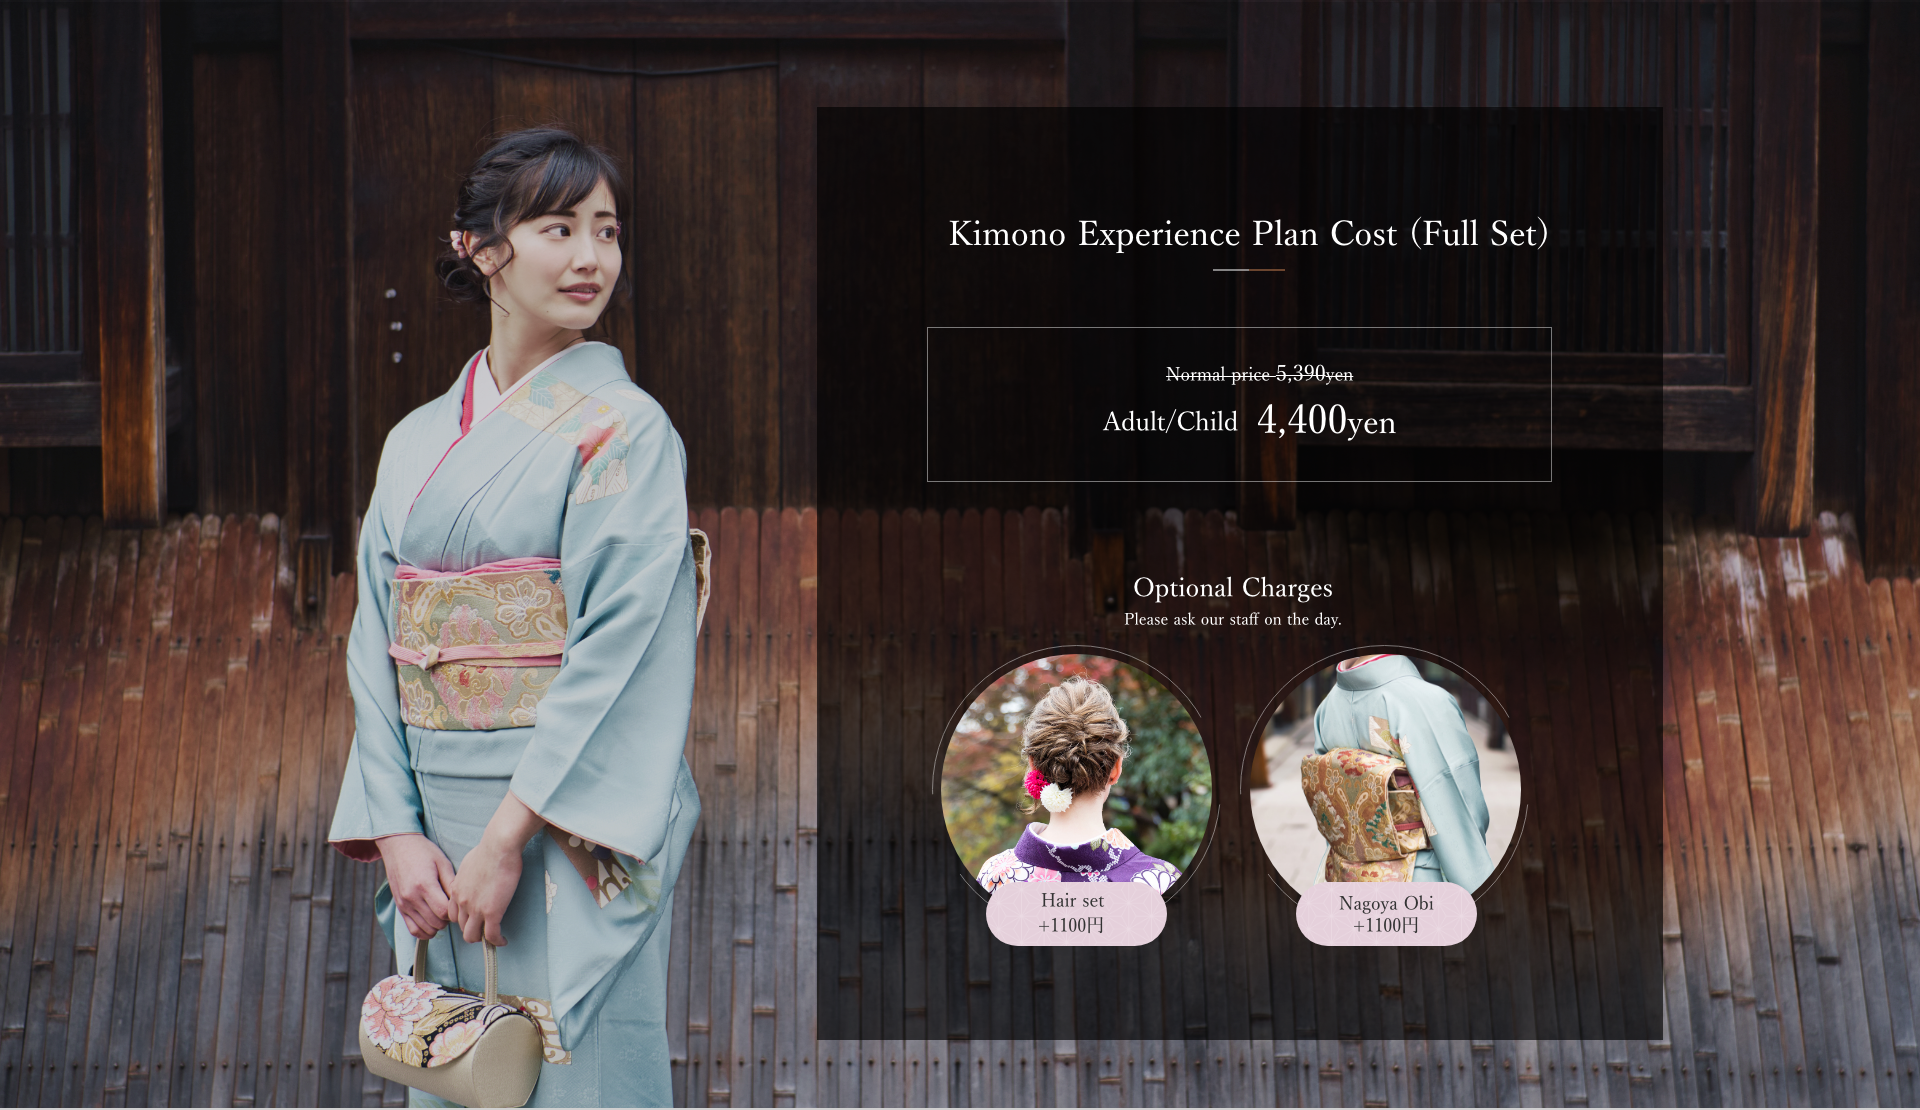 Kimono Experience Plan Cost (Full Set) - Normally 5,390 yen, now 4,400 yen for both adults and children. Optional fees (Hairstyling +1,100 yen, Nagoya Obi Belt +1,100 yen) should be requested on the day with our staff.